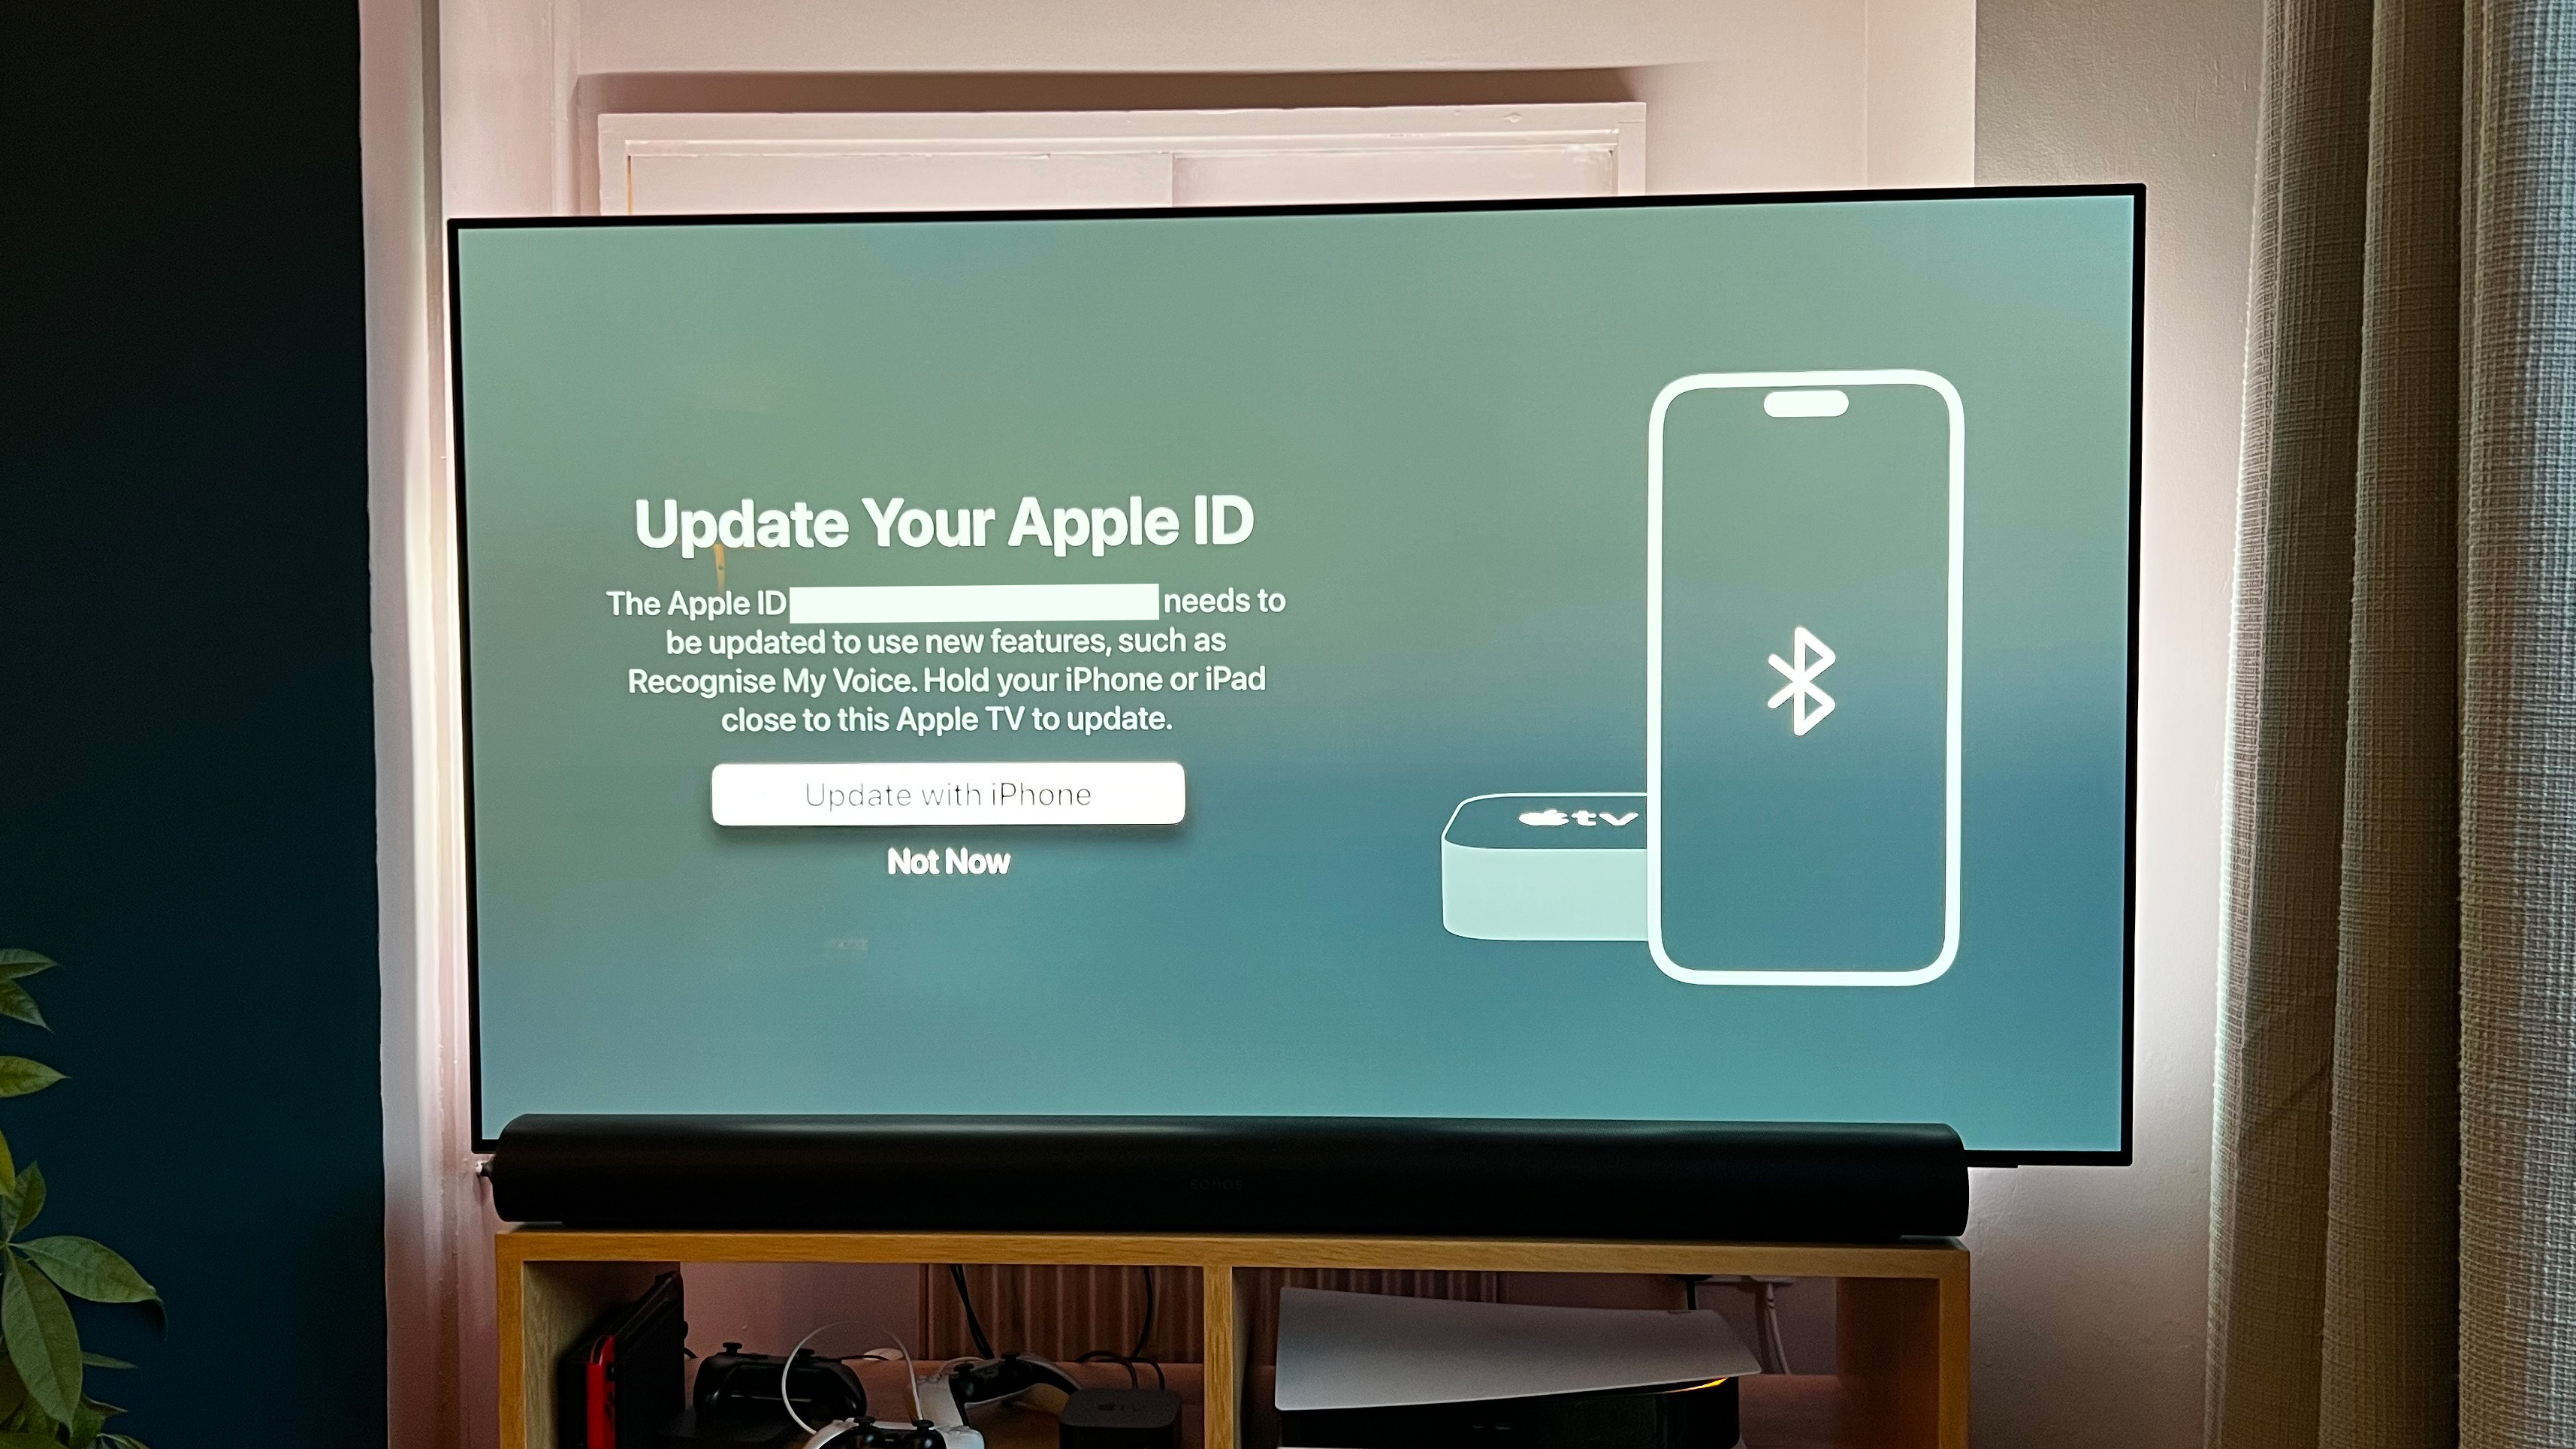 Can you use Apple TV 4K without Apple ID?